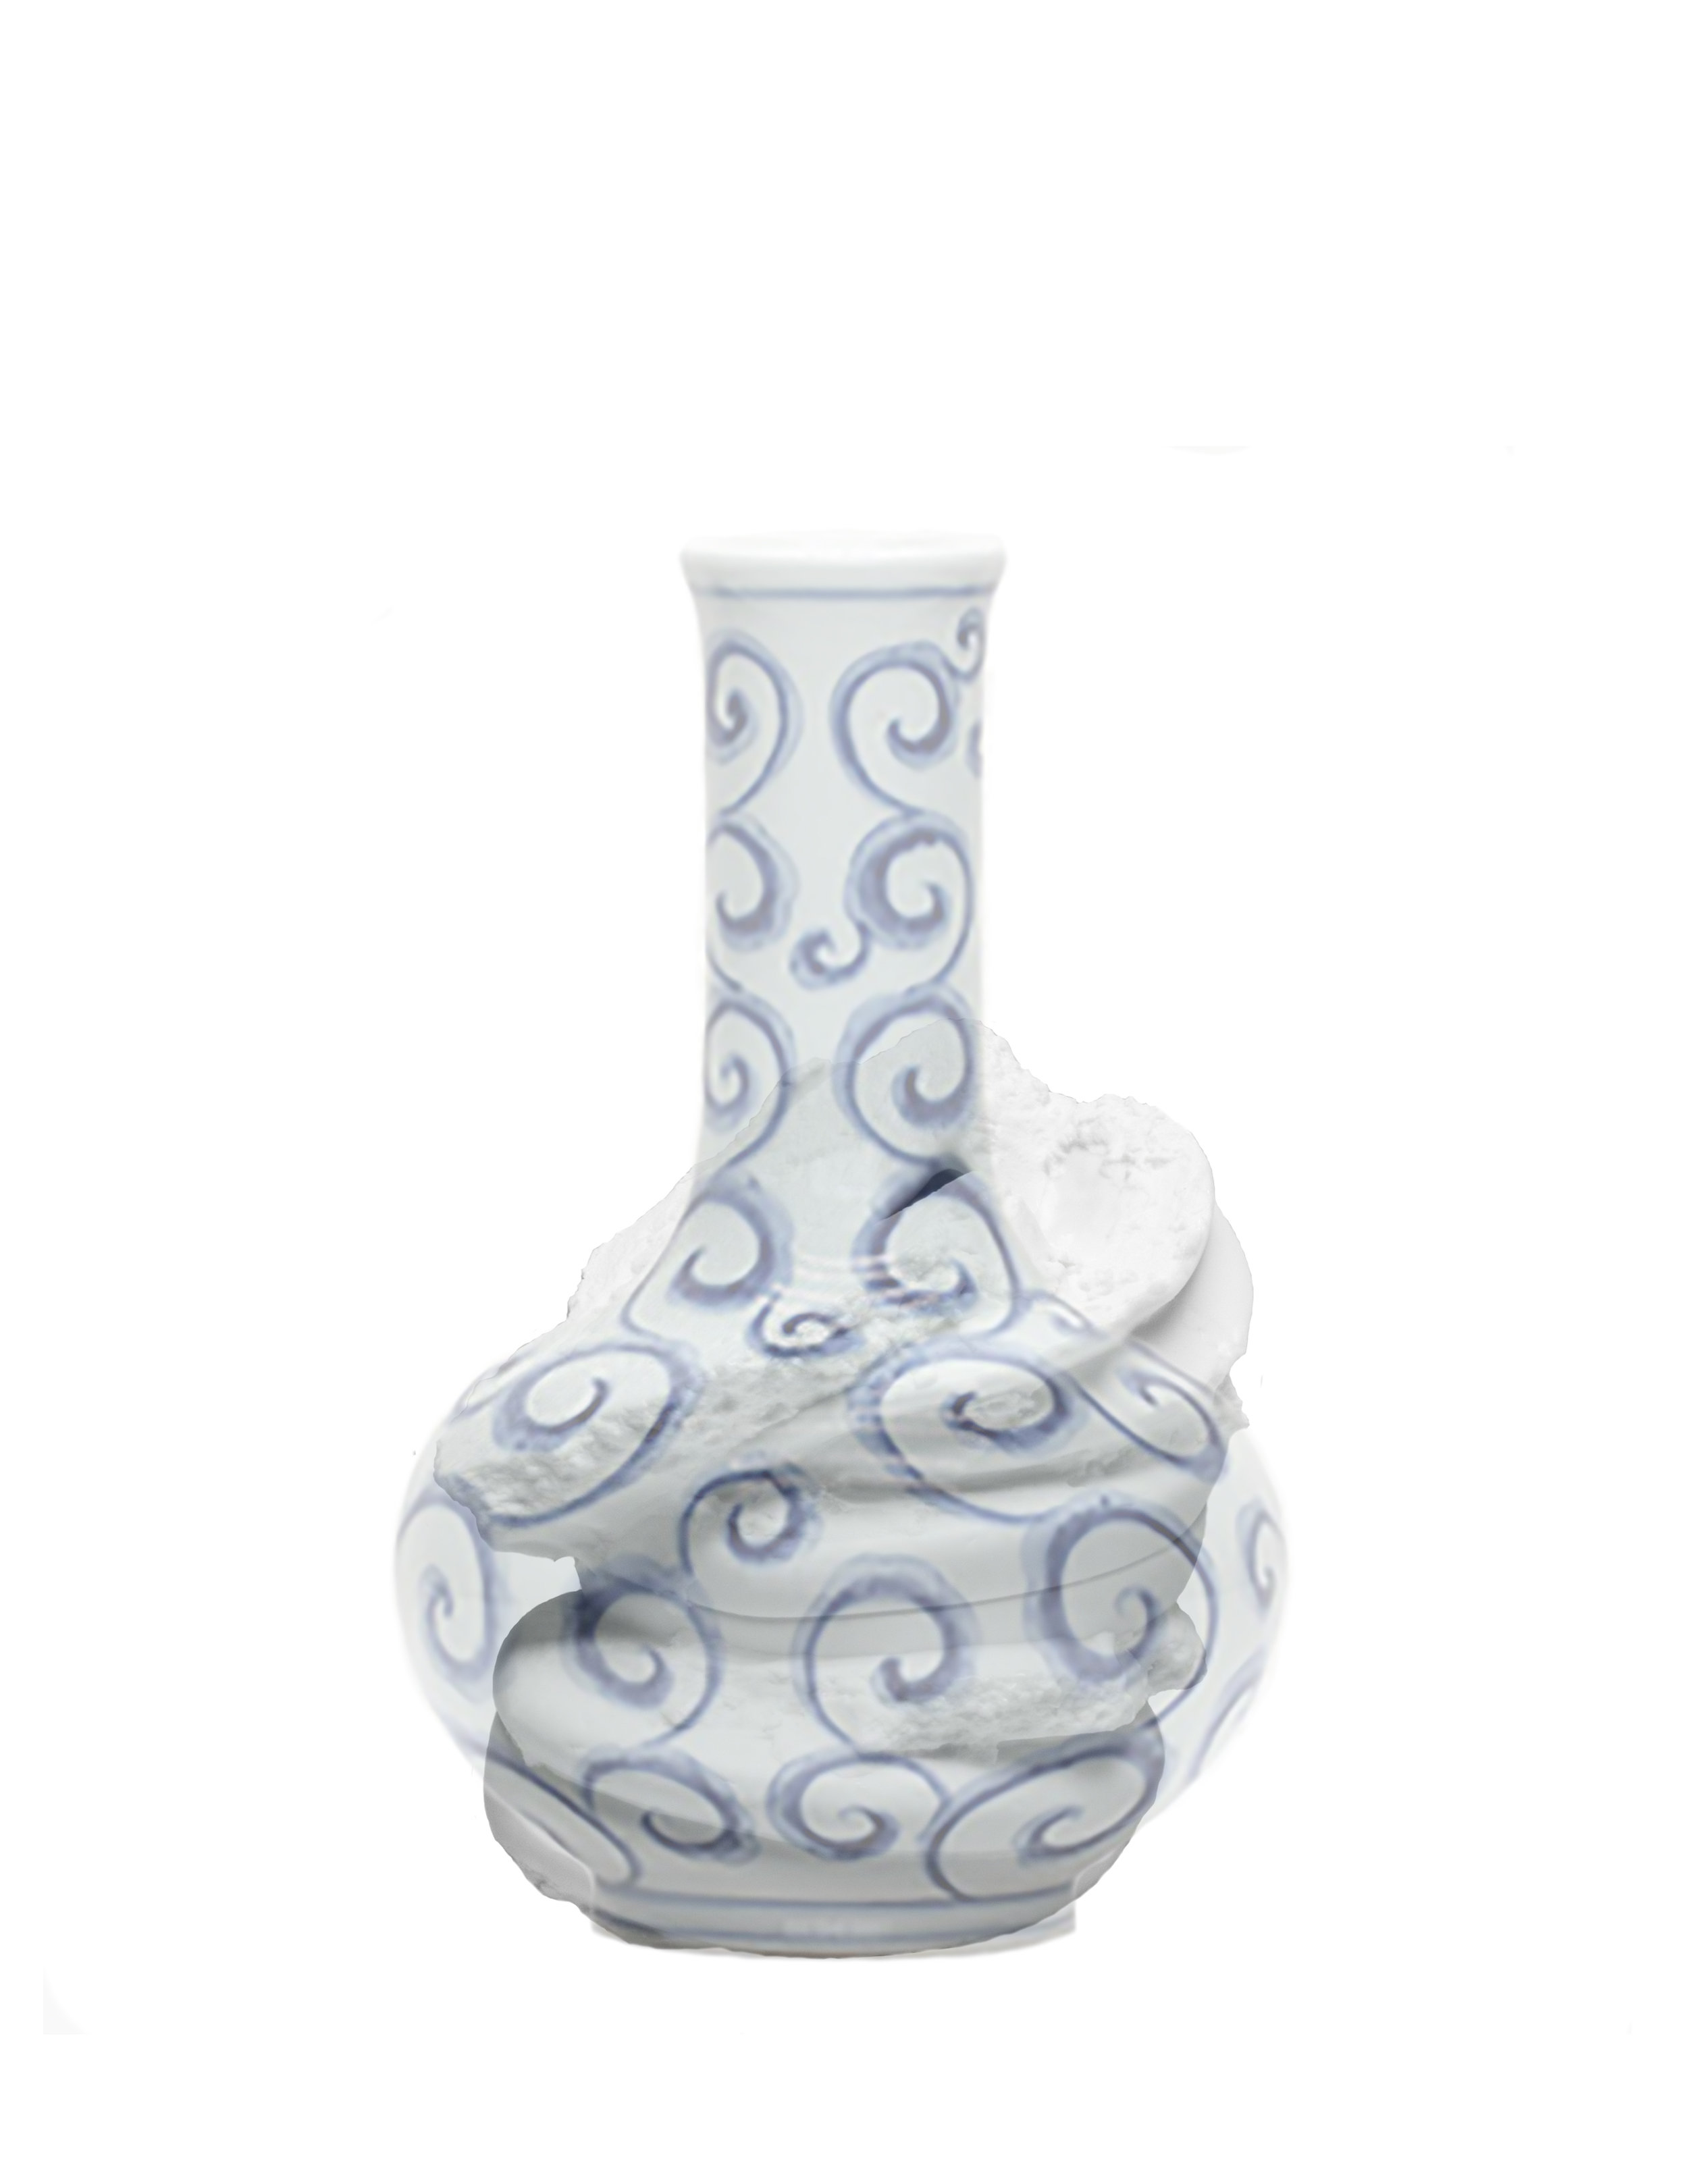   Saggar | Form Series , Digital Print, Ming Dynasty Form overlaid in cast form. 2019  Ming Dynasty collapsed saggar and porcelain forms were collected from various sites around Jingdezhen, China, and moved through the mold making process; cast as th